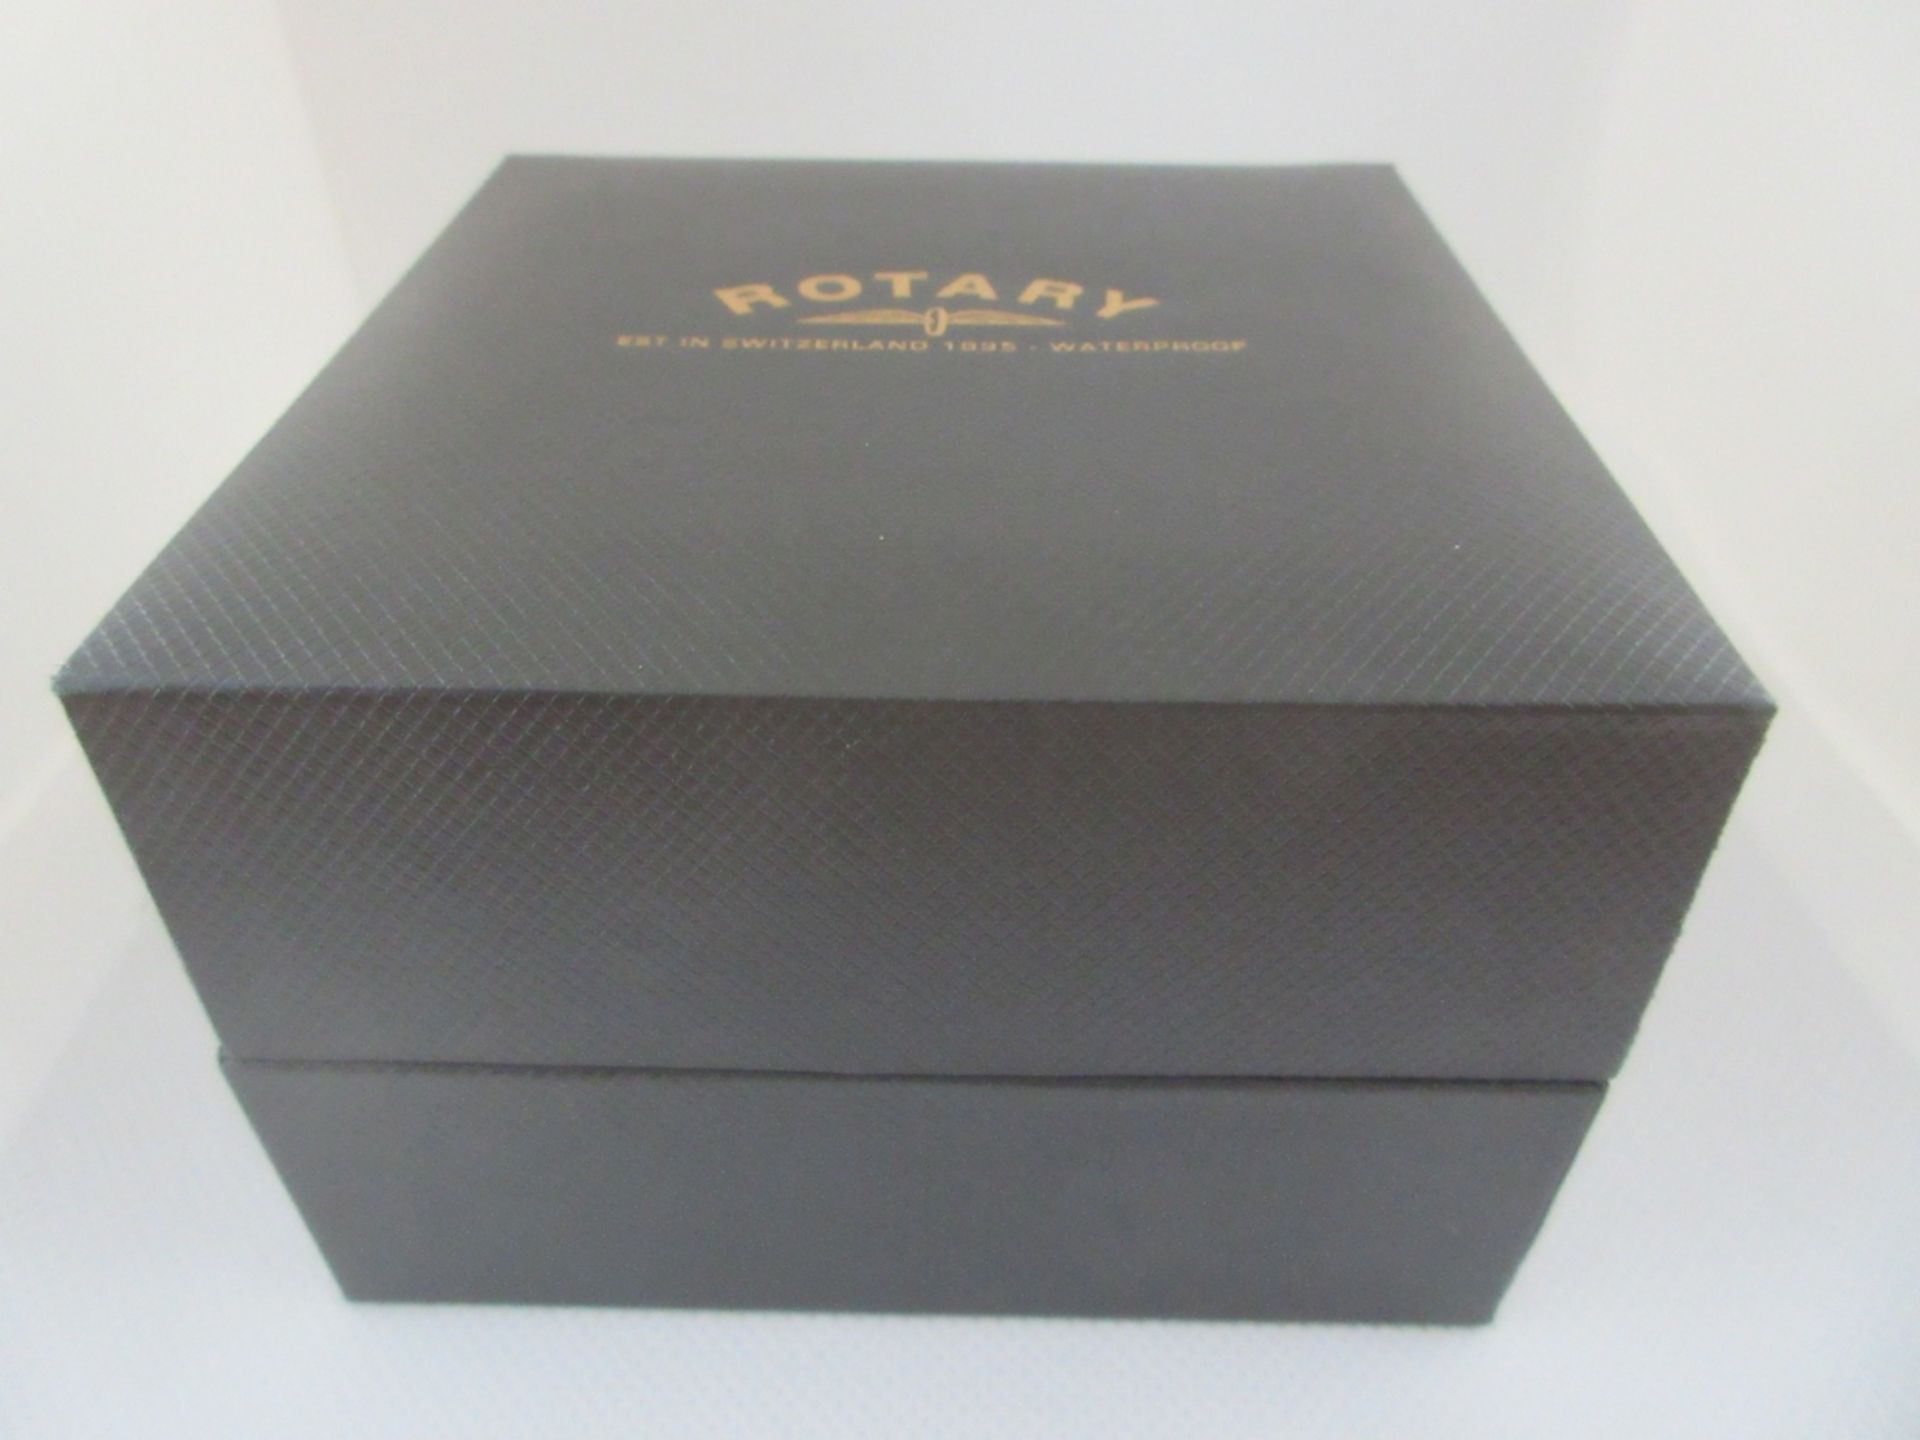 ROTARY MALE WATCH, MODEL GS08102/03, CASE DIAMETER 30MM, LEATHER STRAP, BOXED, RRP £ 199 - Image 4 of 4